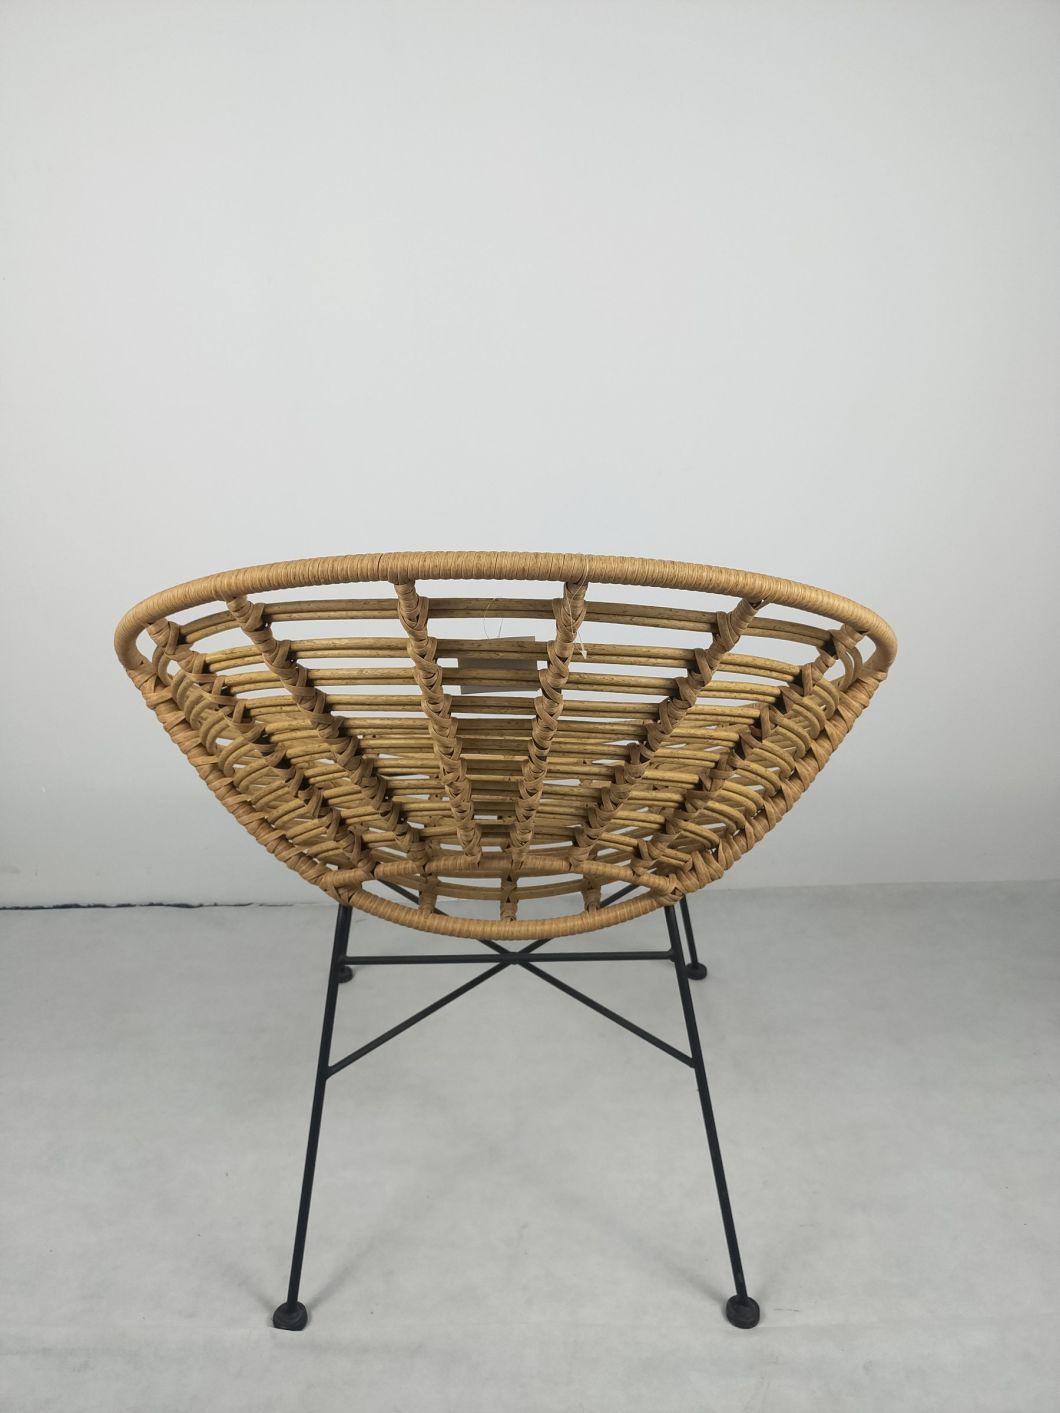 Synthetic Rattan PE Round Wood Wicker Woven Chairs Leisure Furniture